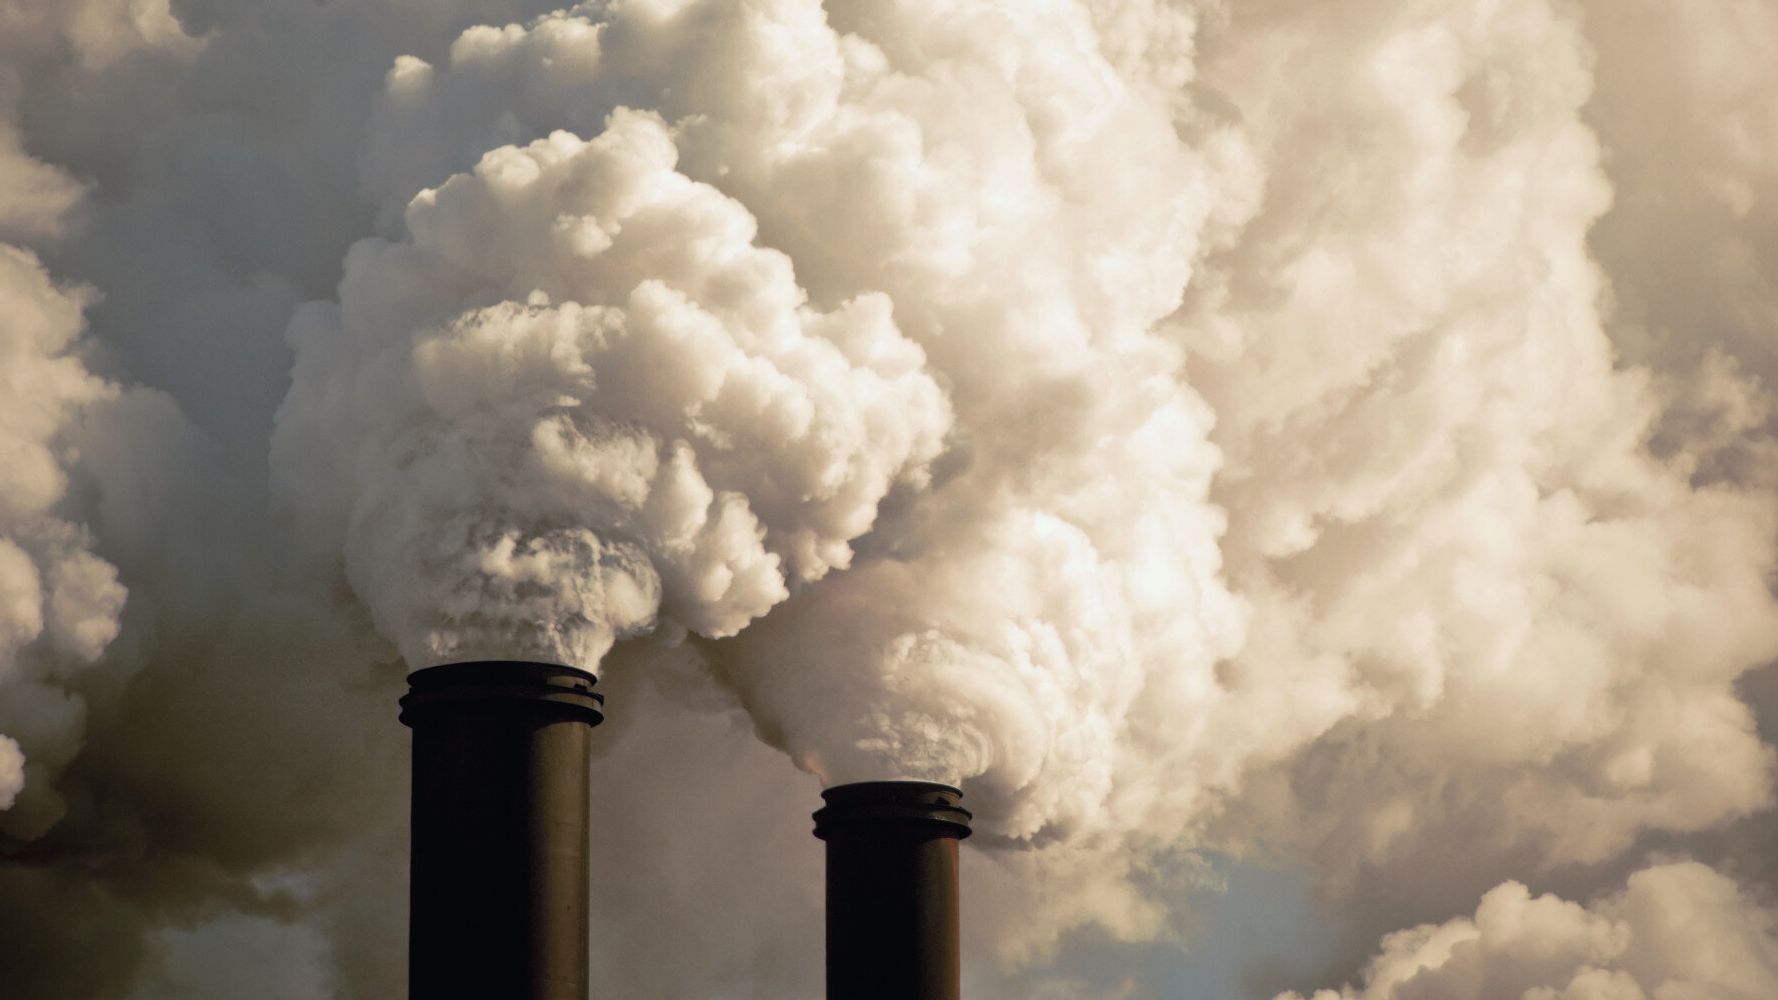 Long-Term Exposure To Air Pollution May Increase The Risk Of Heart